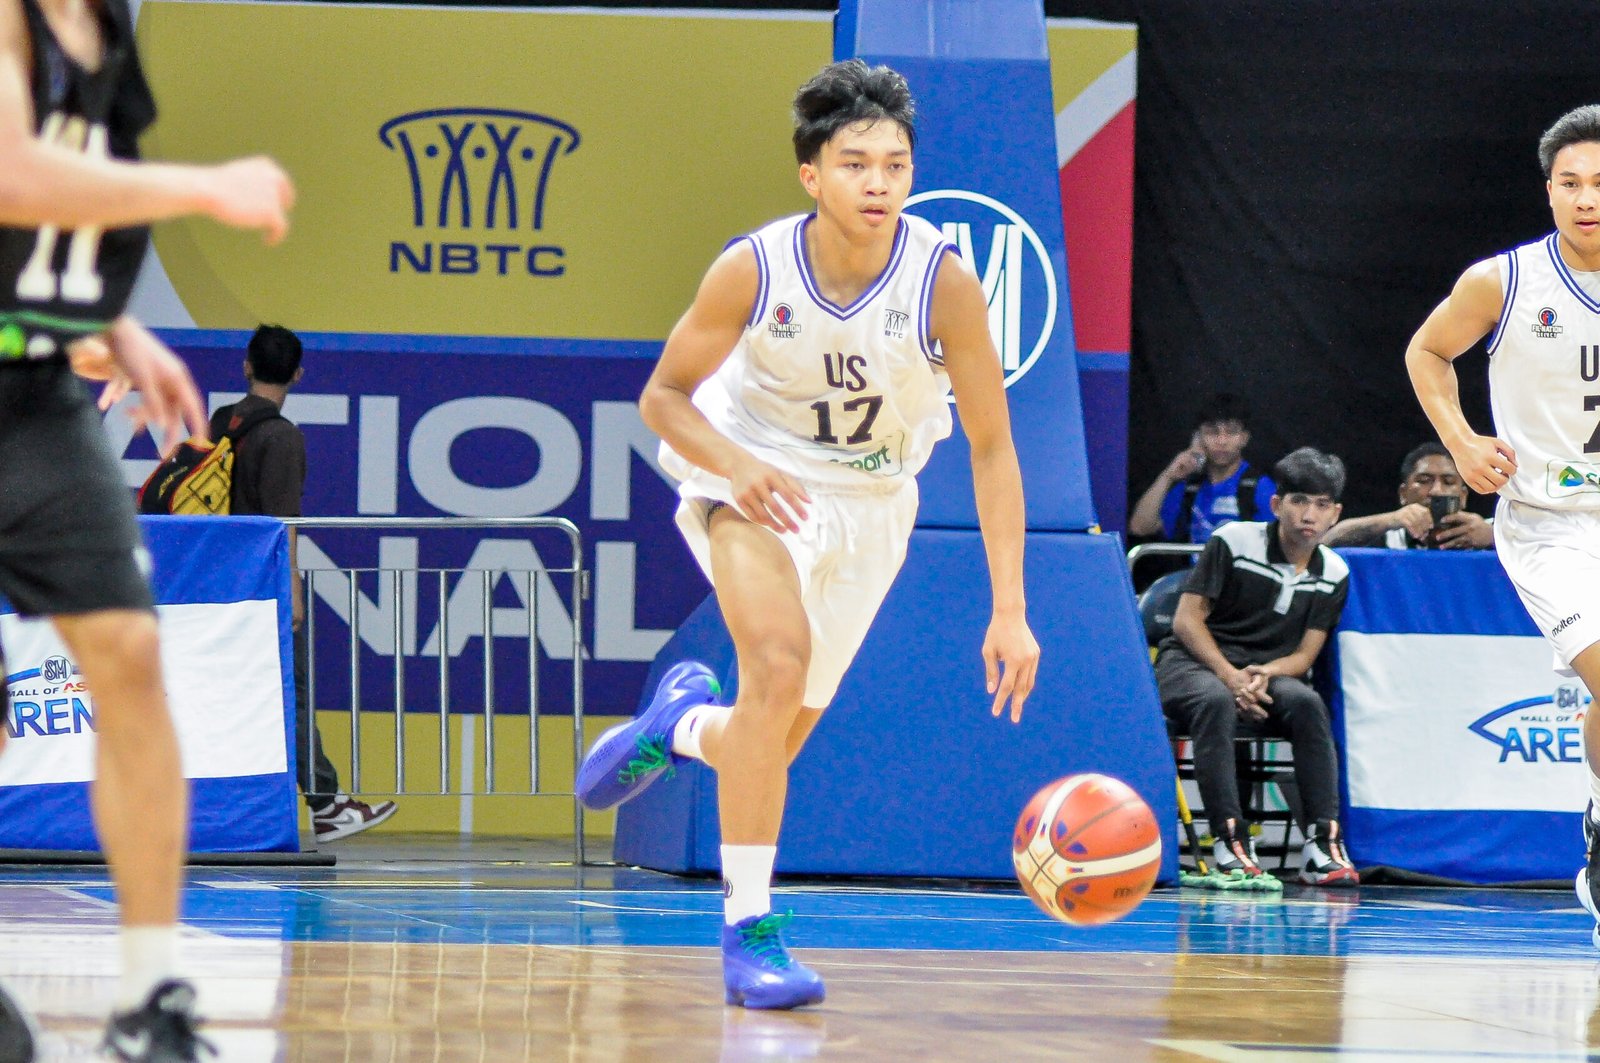 Andy Gemao, Jacob Bayla look to deliver Fil-Am’s first NBTC title